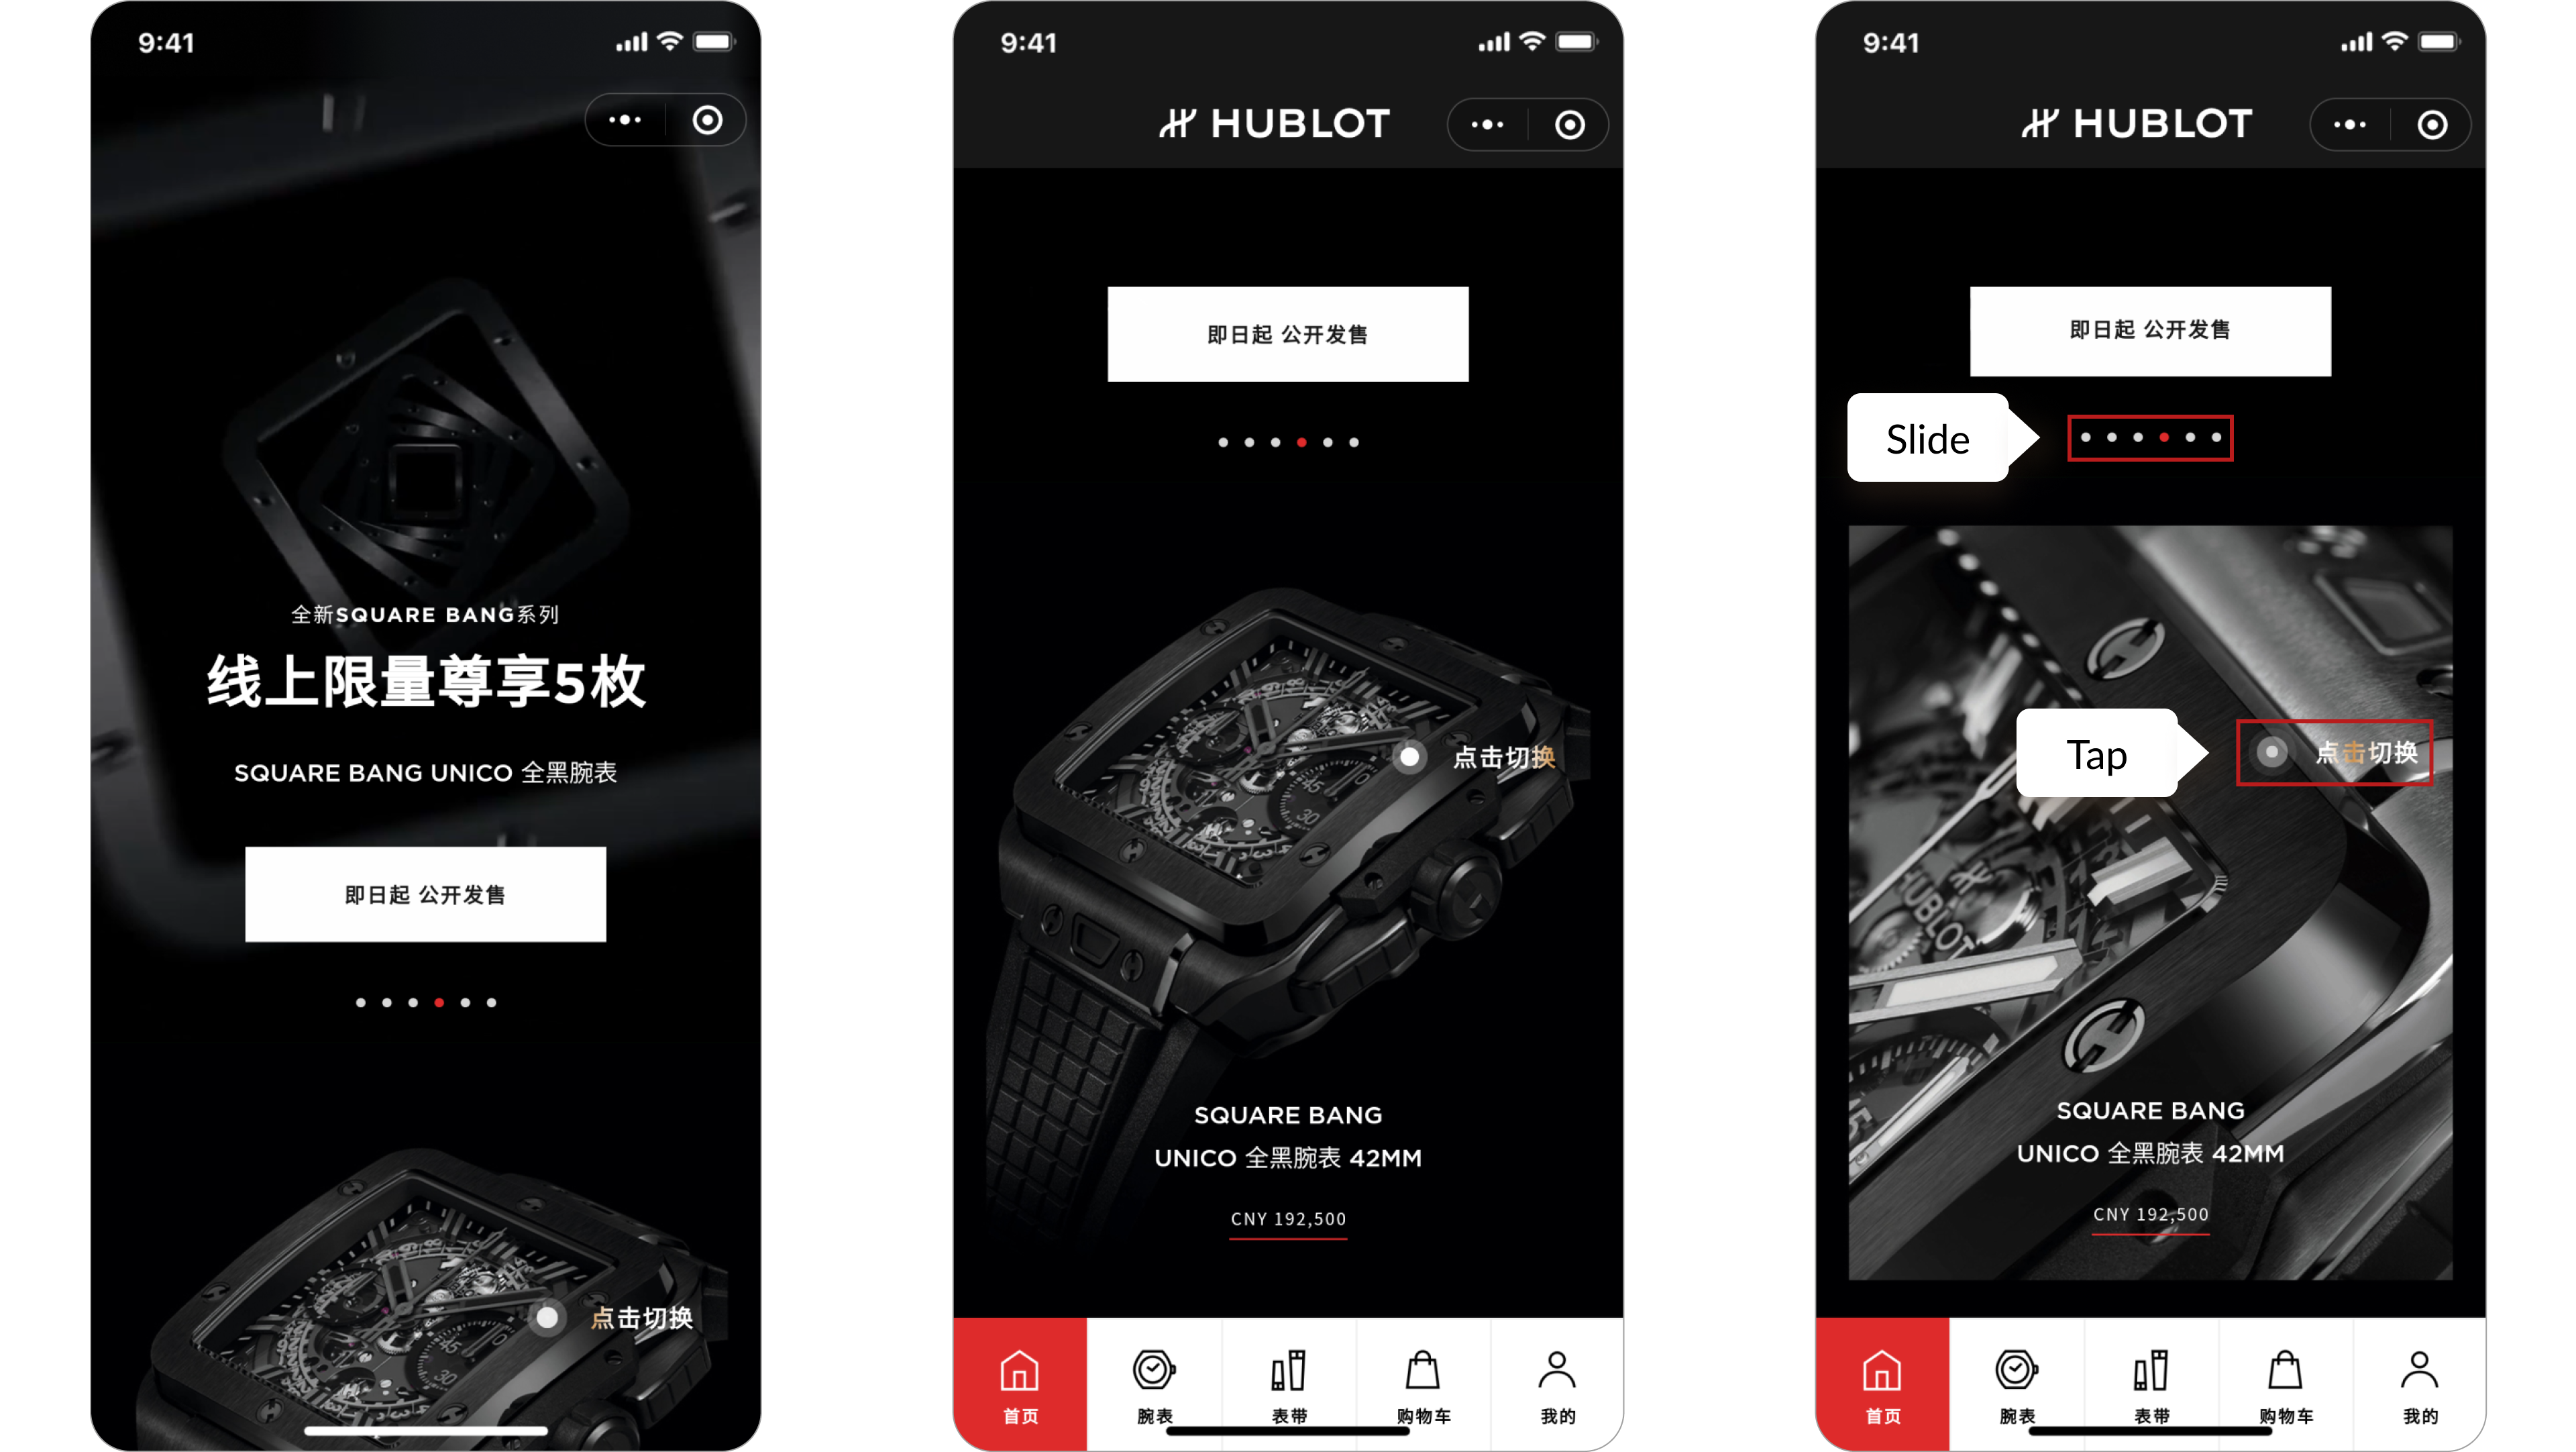 The Homepage of the Hublot Mini Program featuring sliding and tapping interactive blocks to deliver information in the most engaging way